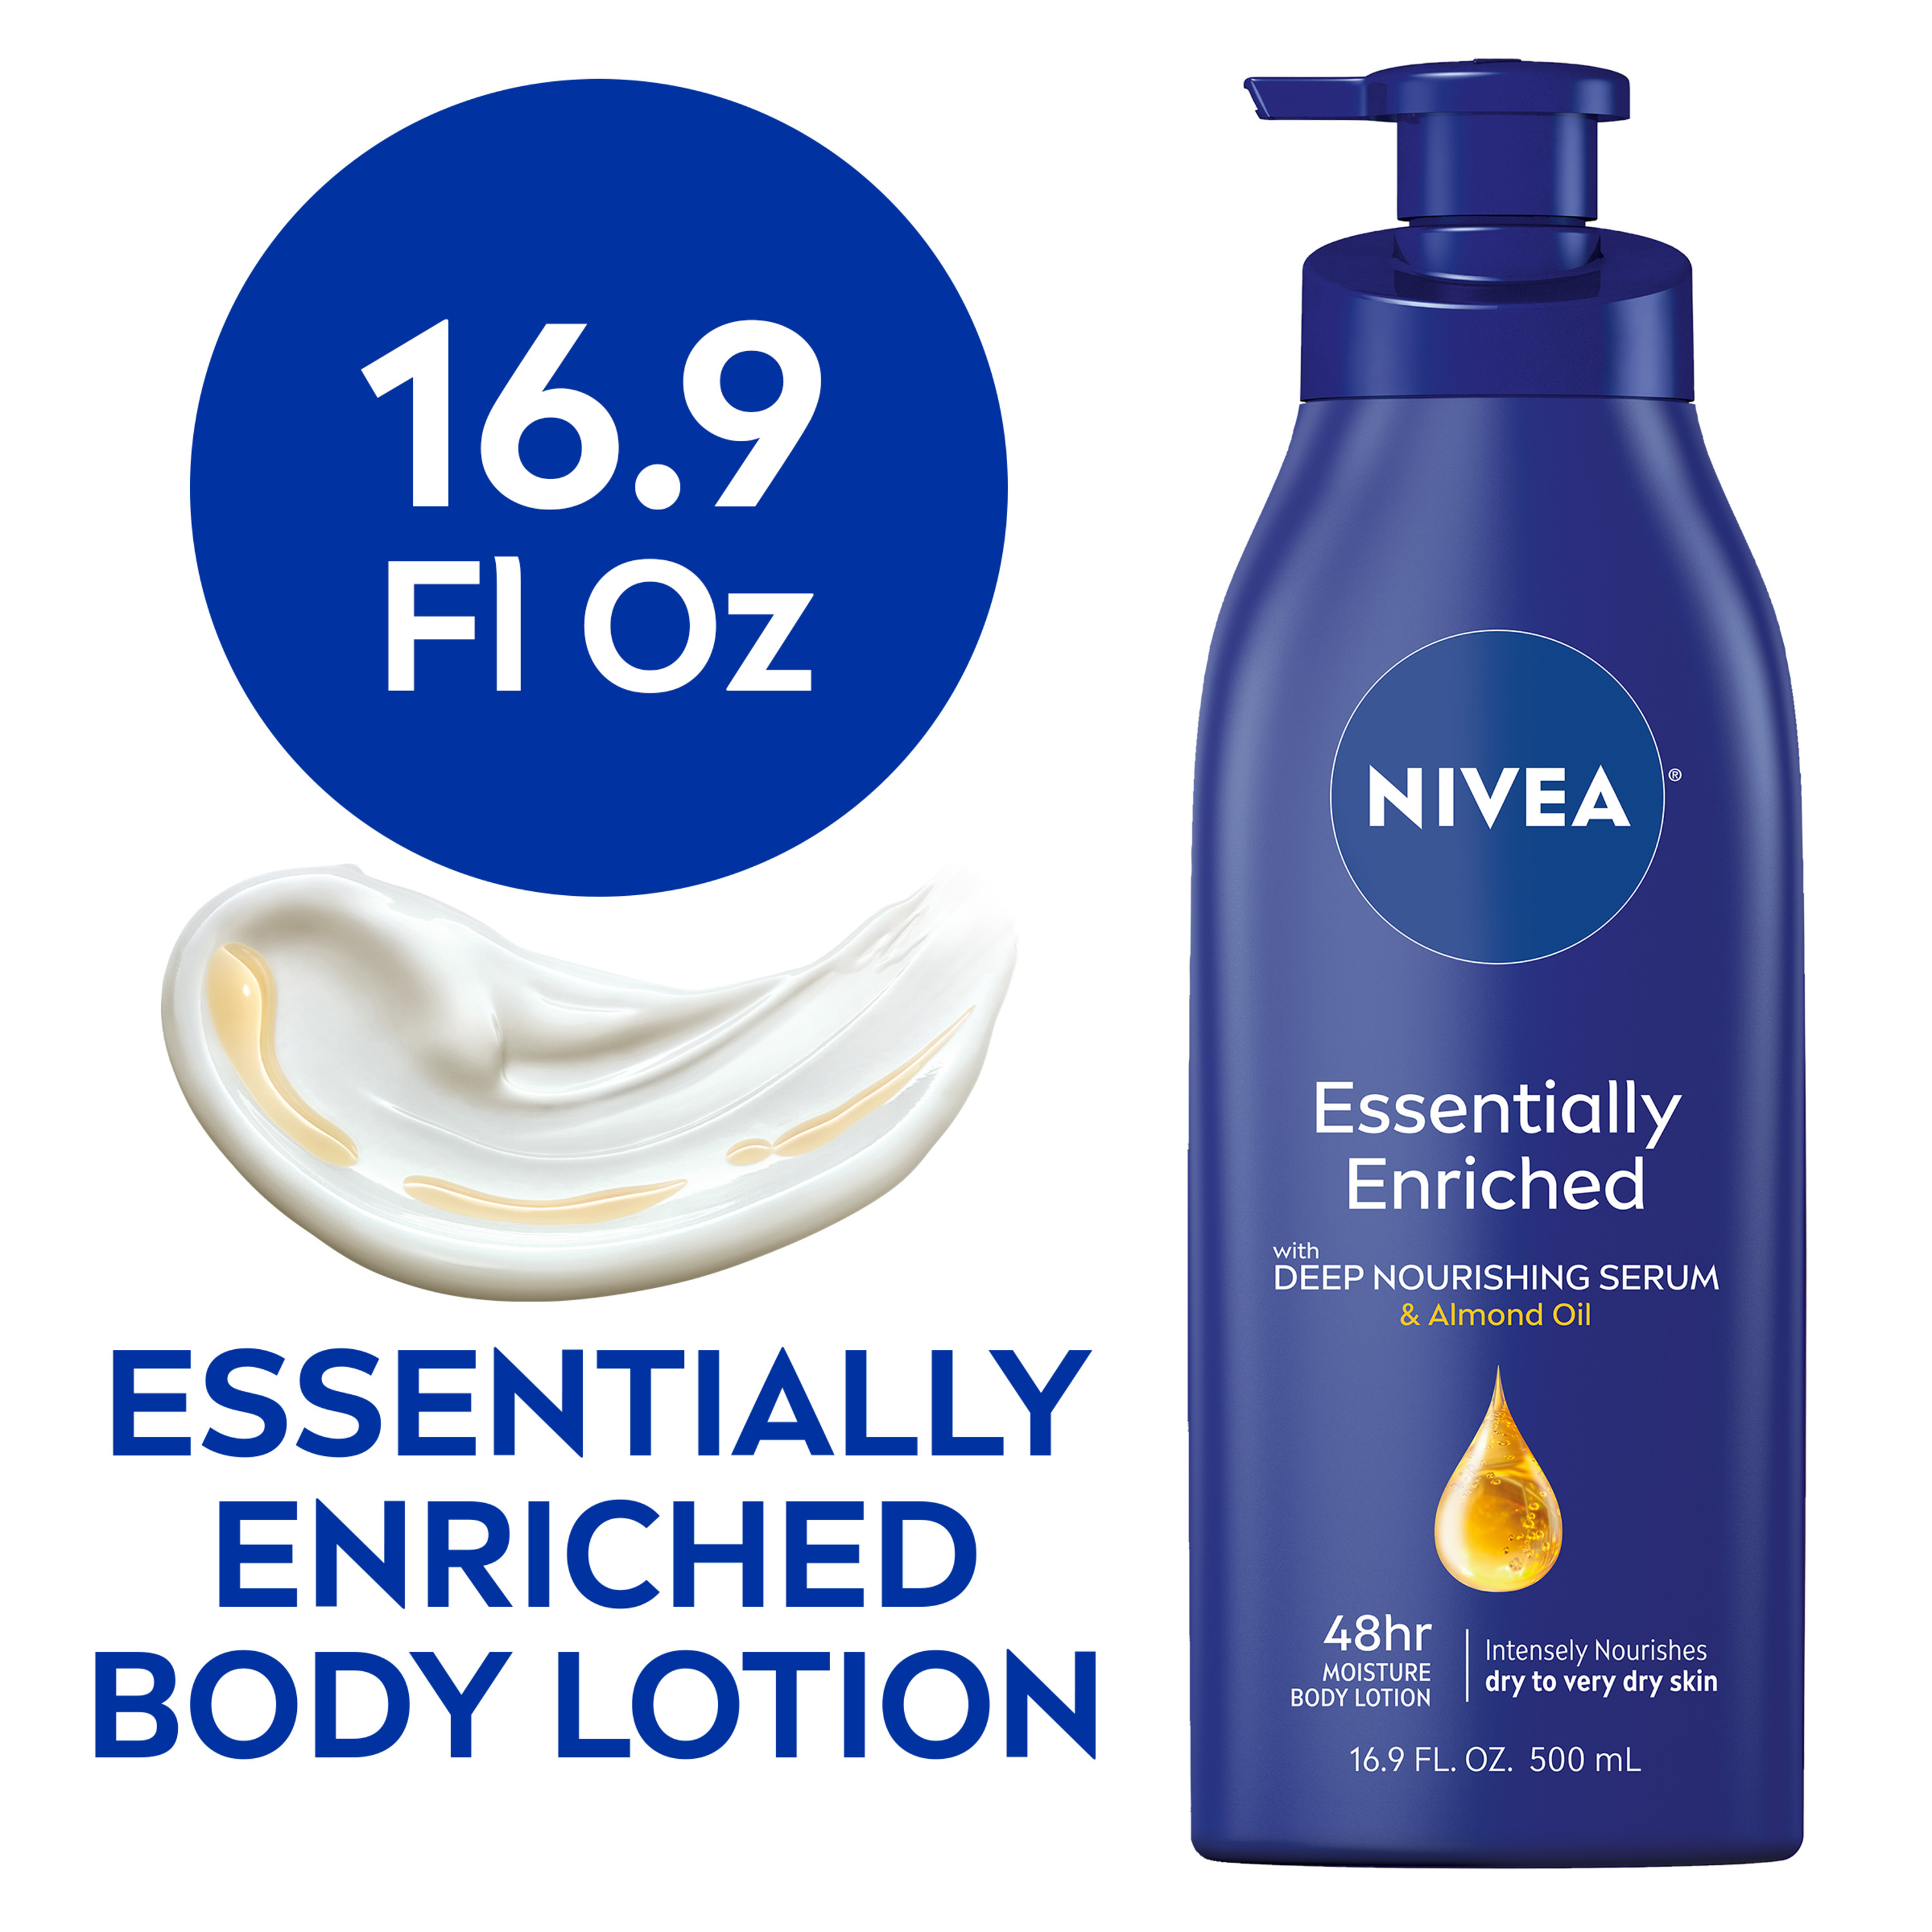 NIVEA Essentially Enriched Body Lotion for Dry Skin, 16.9 Fl Oz Pump Bottle - image 1 of 14